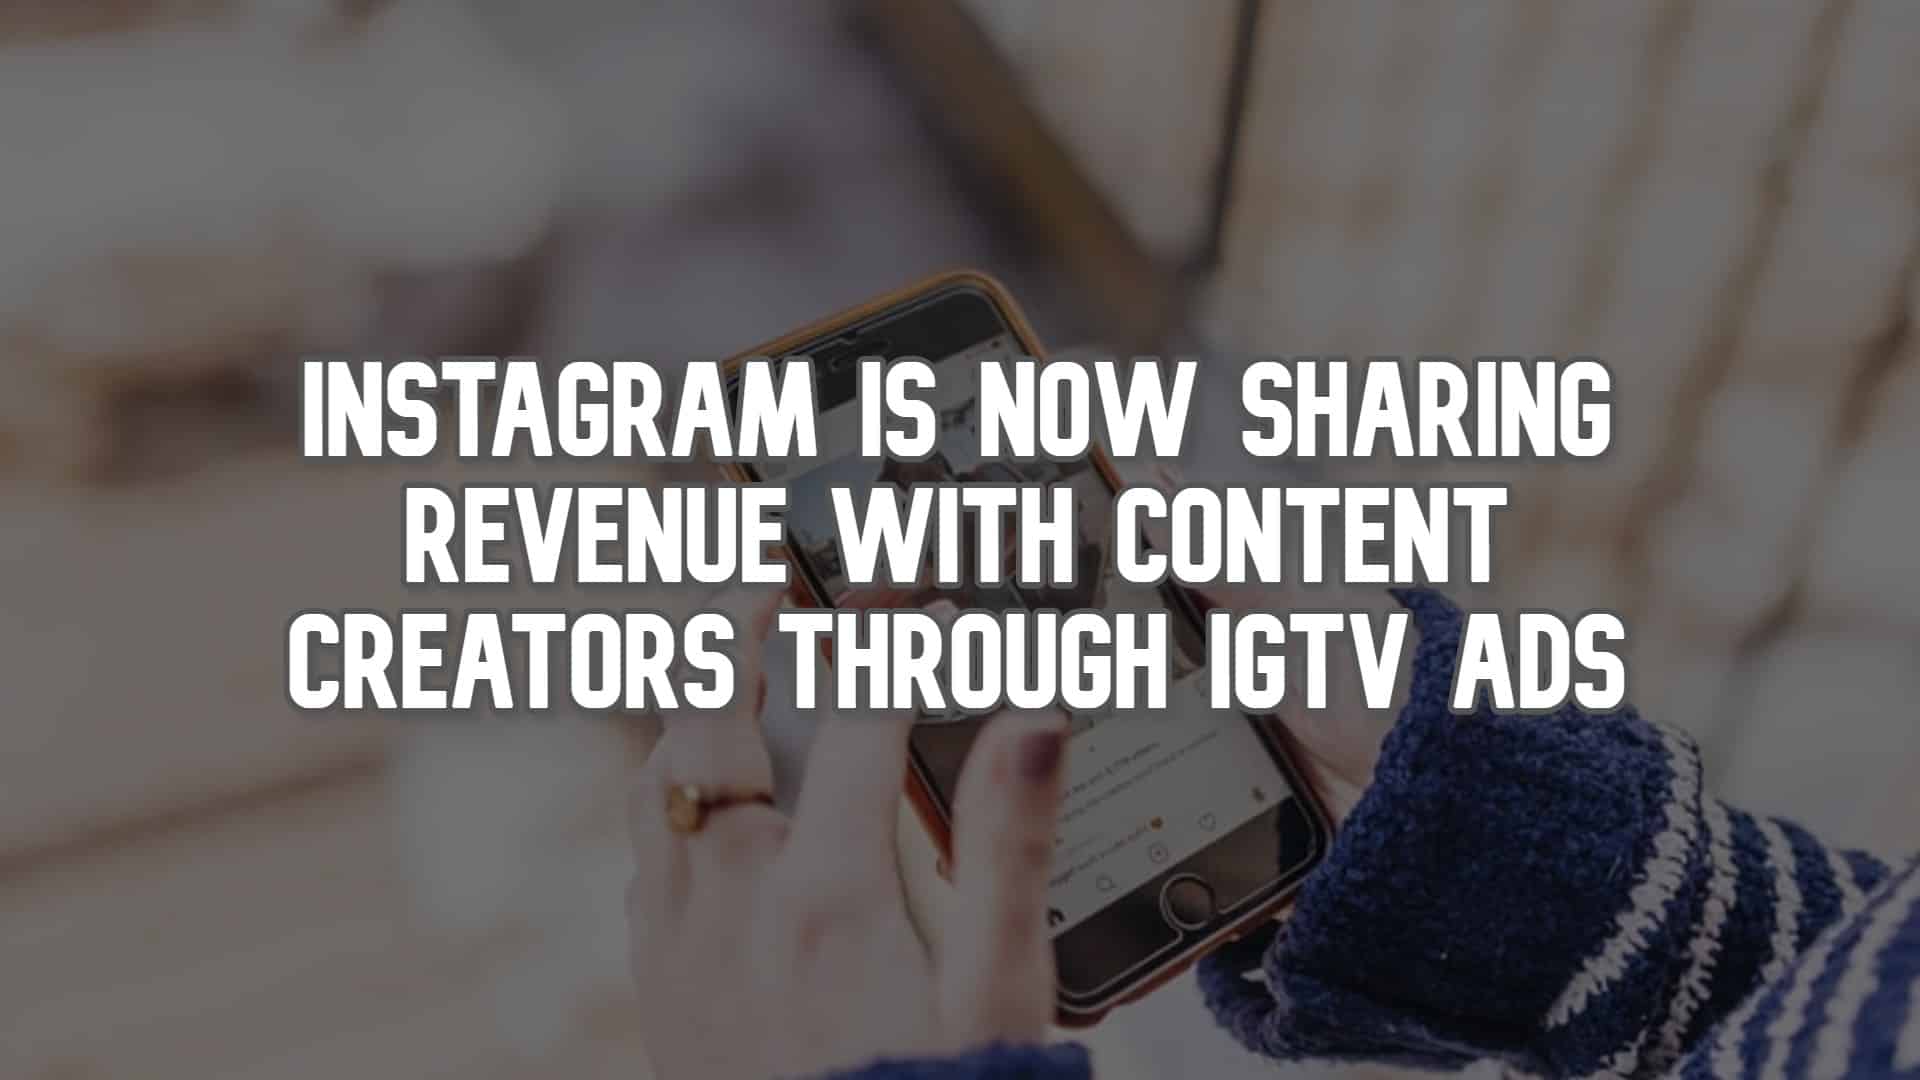 Instagram-is-Now-Sharing-Revenue-with-Content-Creators-through-IGTV-Ads.jpg